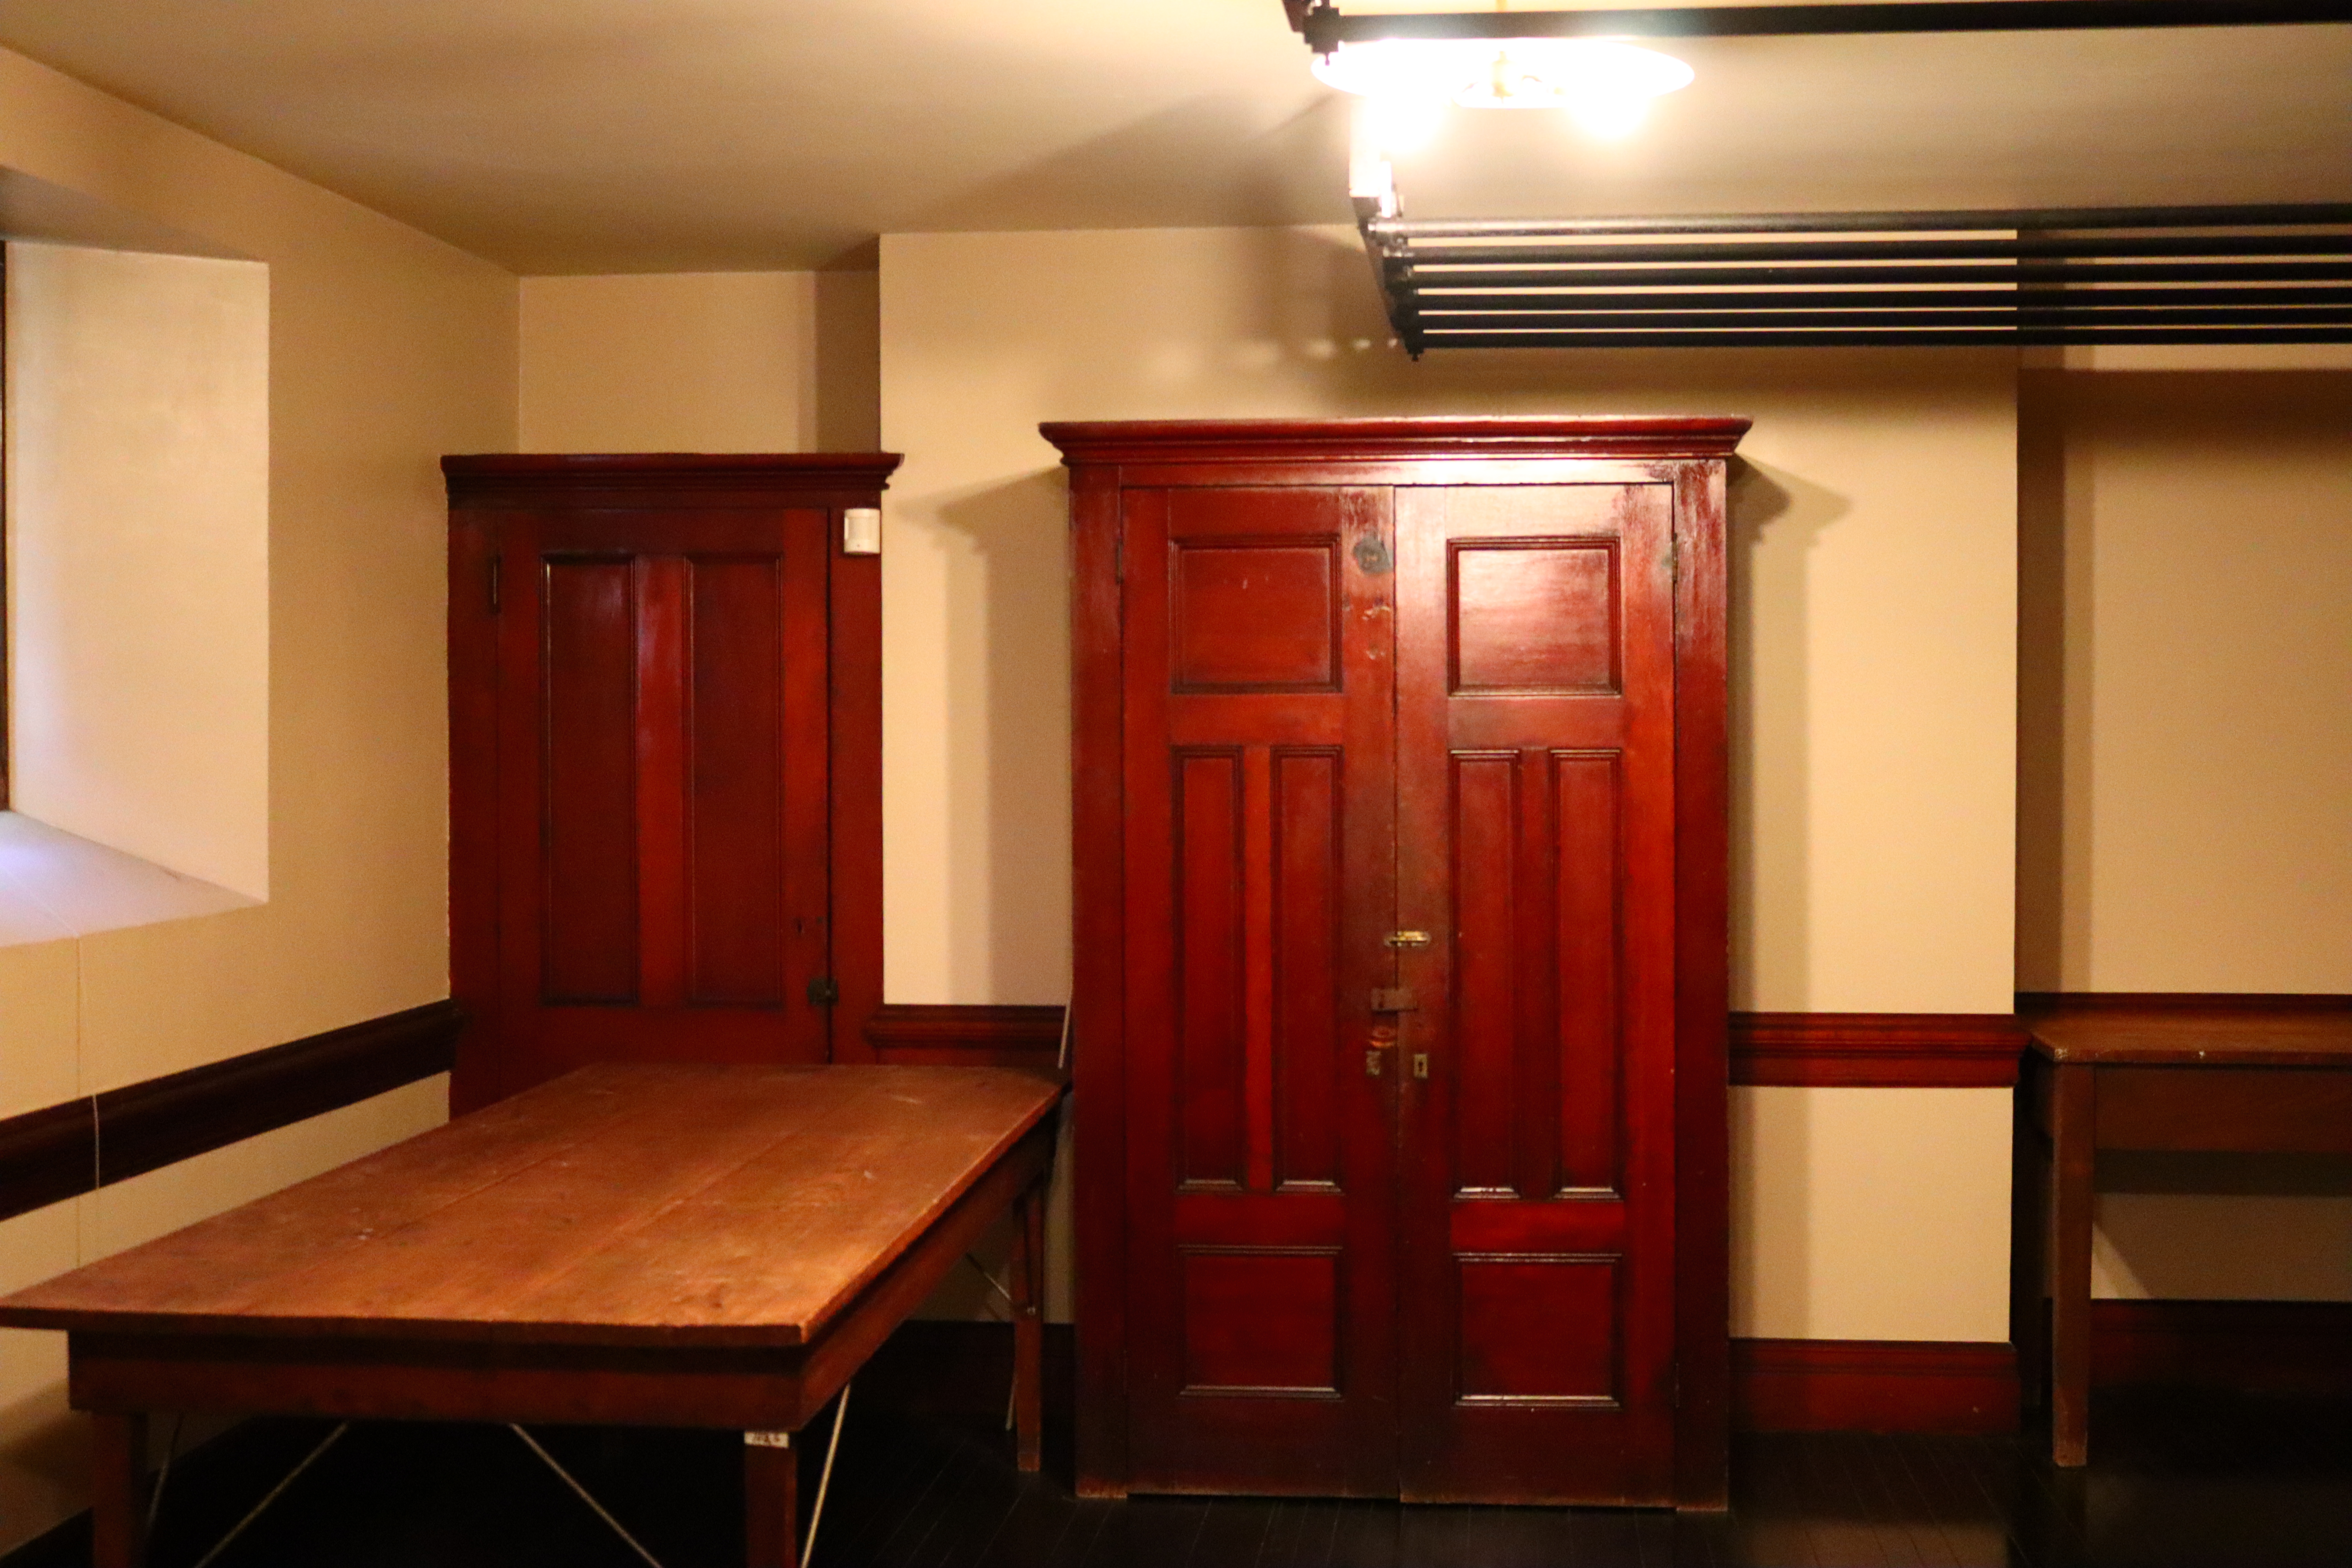 A tall wooden cabinet in a room with white walls. There is a table and a second cabinet to the left.